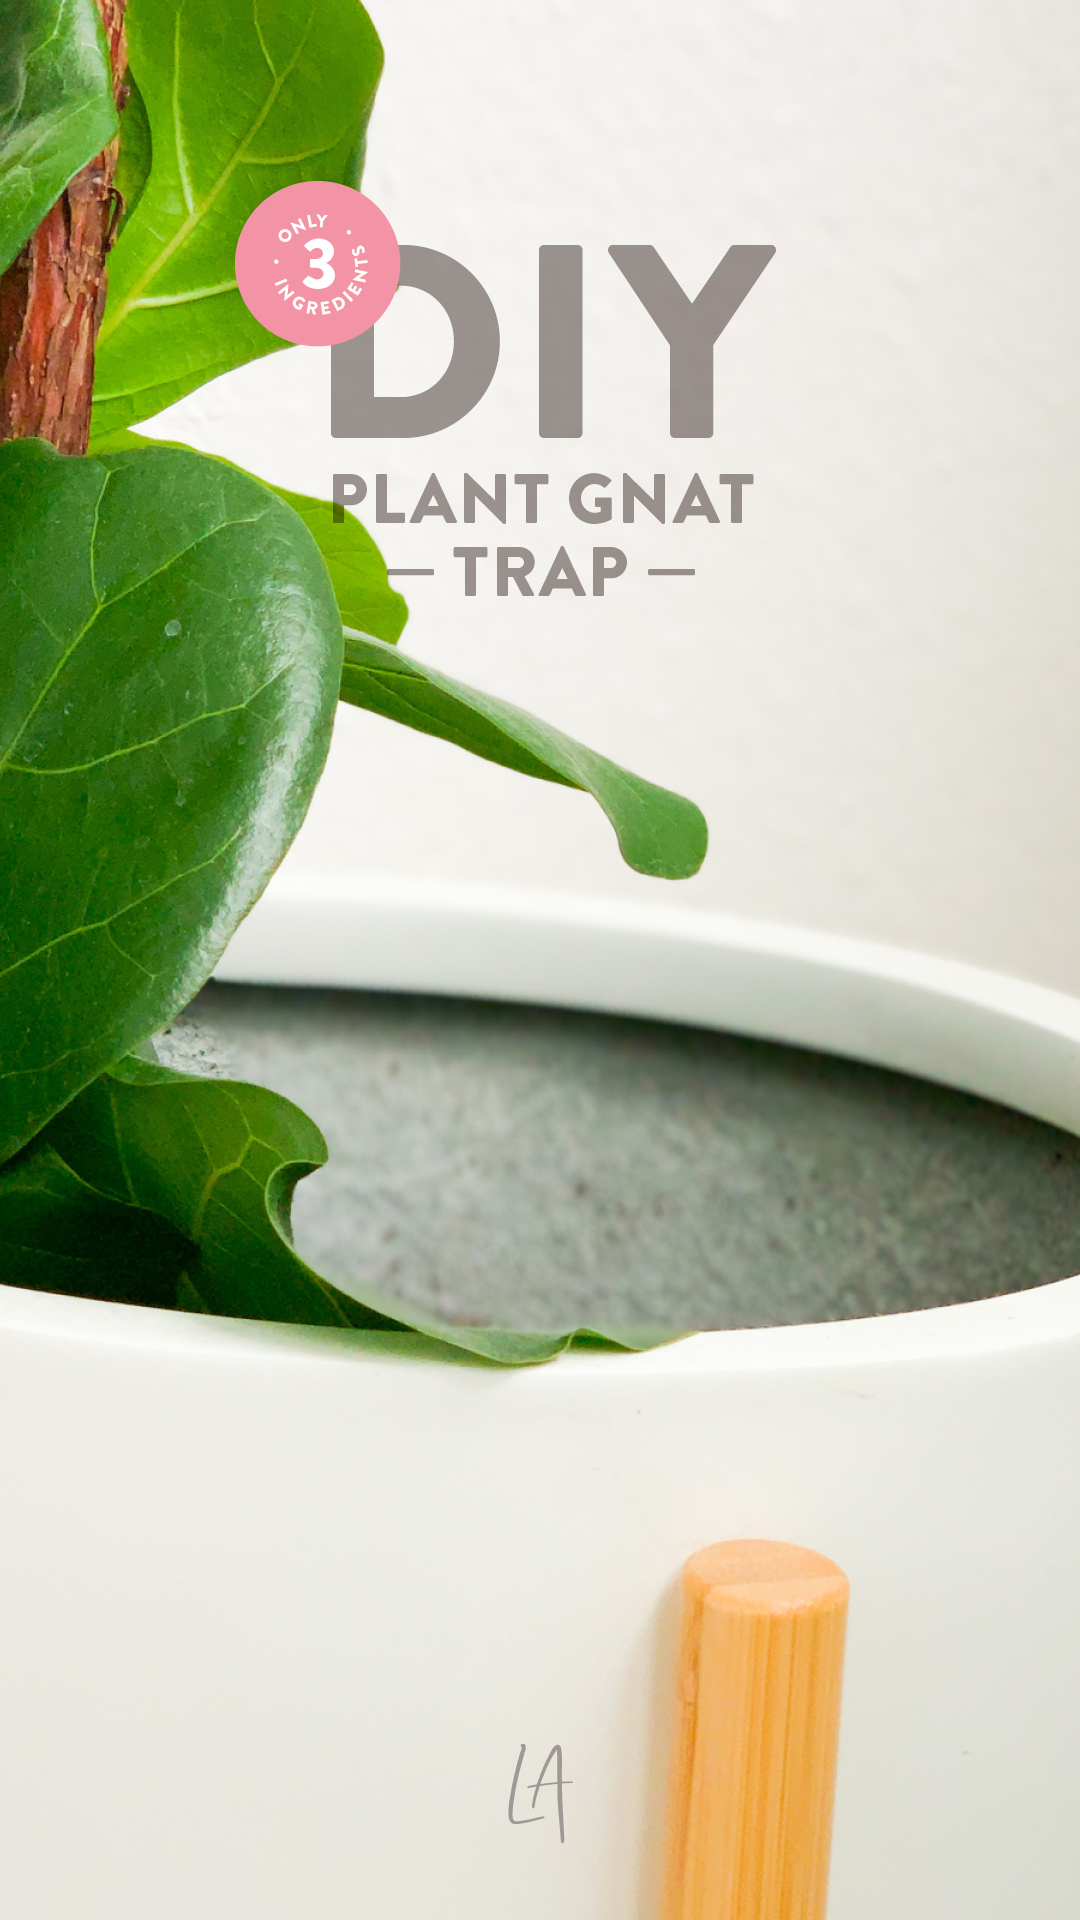 How to get rid of plant gnats